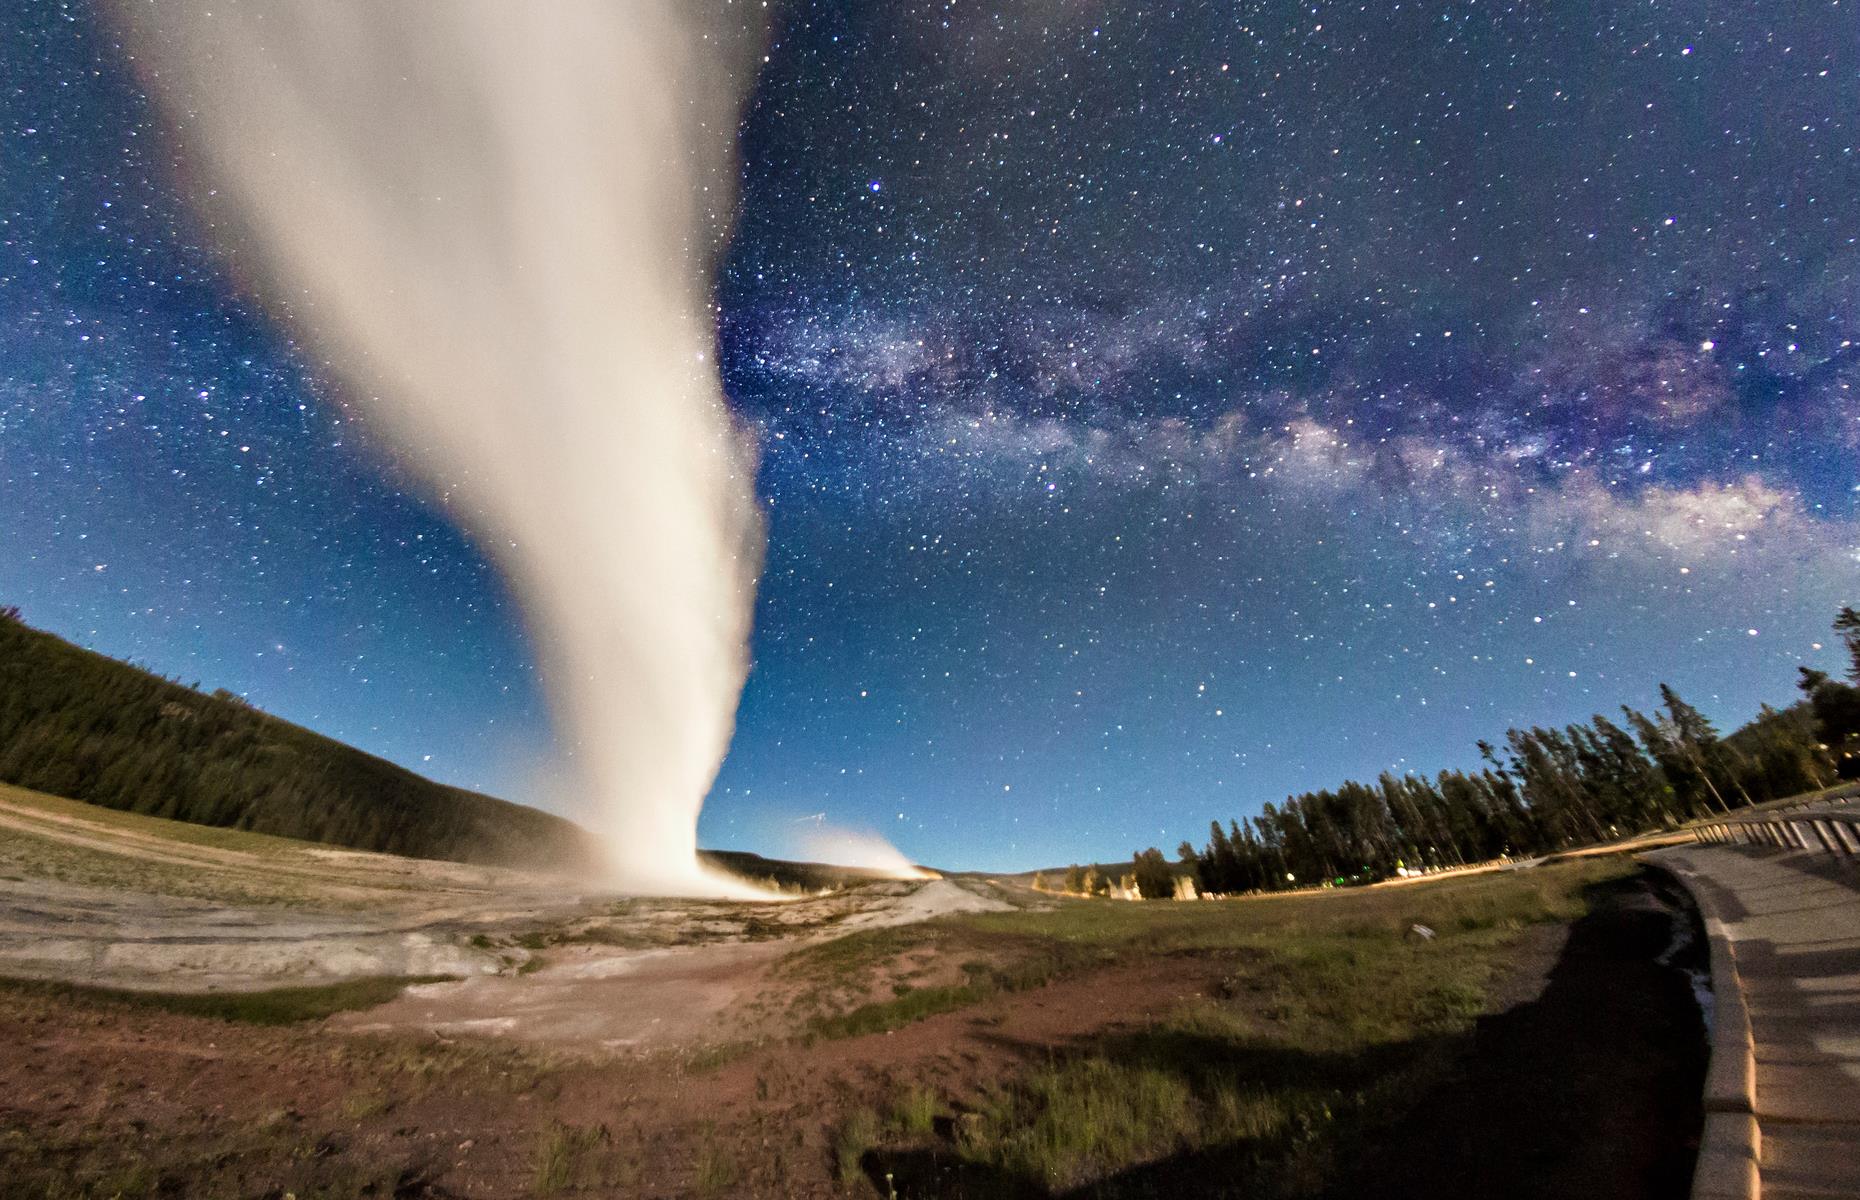 <p>We’ve had glaciers, canyons and mountains, but how about stargazing with erupting columns of boiling water for company? Yellowstone has the largest concentration of geysers on the planet – and many double up as cool spots for stargazing, with top areas including Mammoth Hot Springs and the Upper Geyser Basin. The 10,243-foot (3,122m) Mount Washburn also has fabulous views. Yellowstone National Park Lodges’ <a href="https://www.yellowstonenationalparklodges.com/adventure/winter-activities-at-snow-lodge/steam-stars-and-winter-soundscapes/">Steam, Stars and Winter Soundscapes Tour</a> is currently taking bookings too. </p>